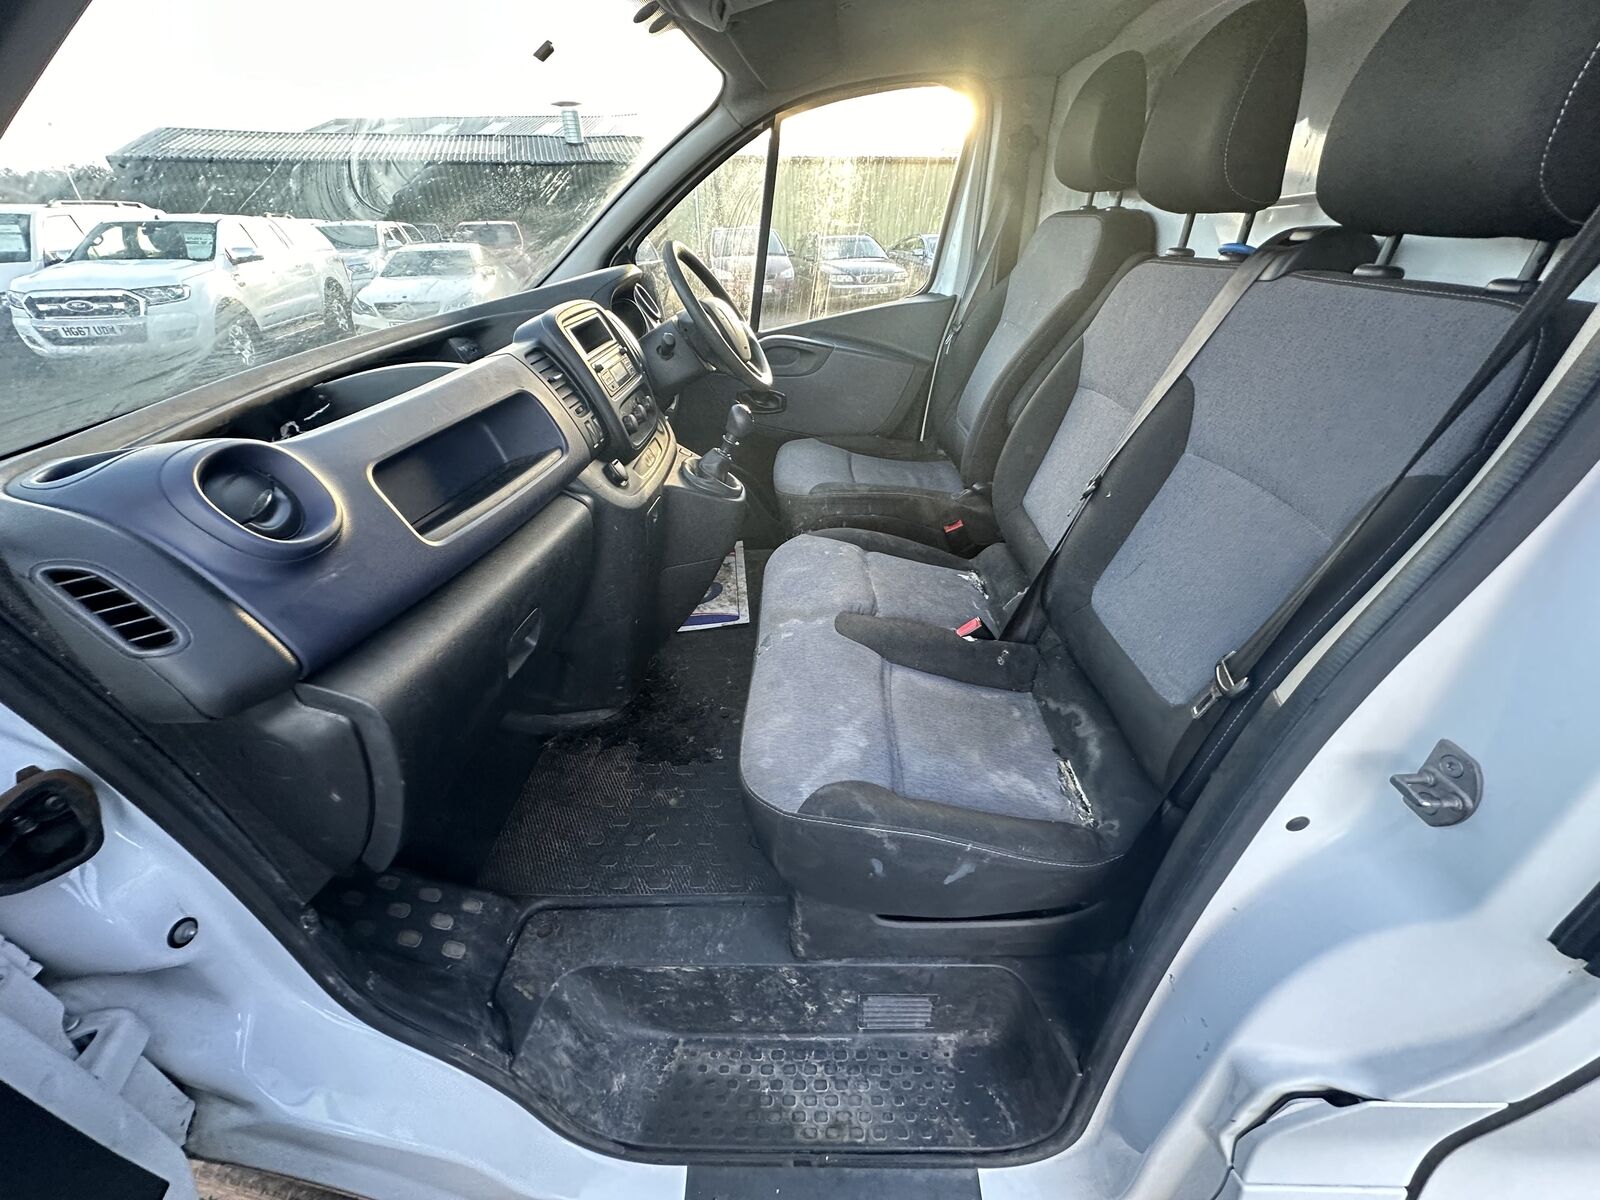 Bid on **(ONLY 75K MILEAGE)** PRACTICAL LWB VAN: 2015 VAUXHALL VIVARO TRAFIC NO VAT ON HAMMER- Buy &amp; Sell on Auction with EAMA Group